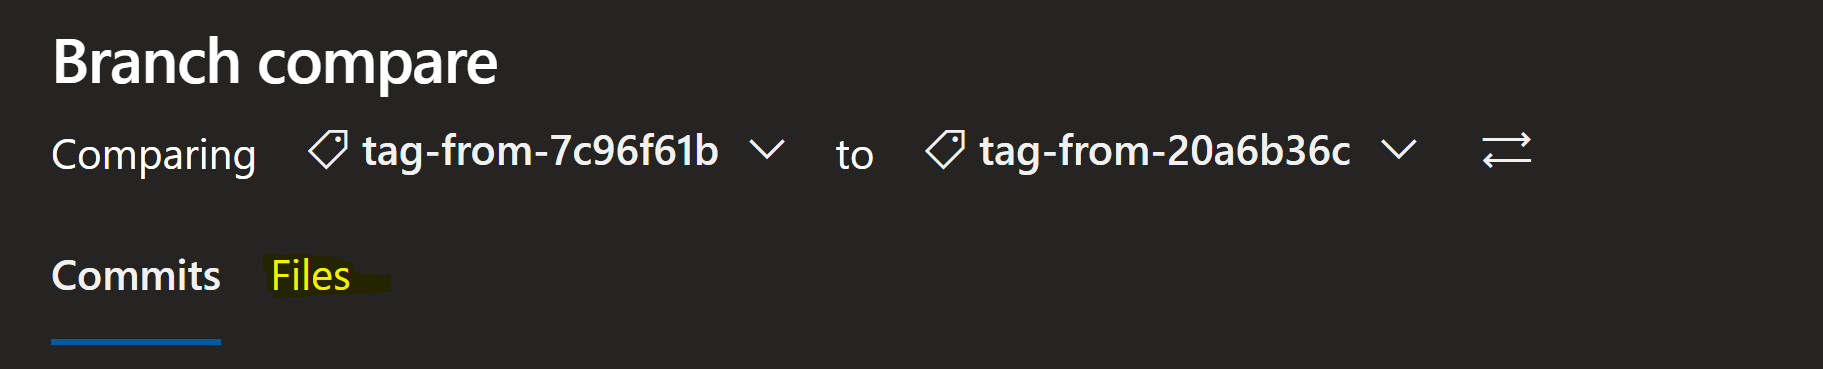 Click 'Files' to see what has changes between the two tags